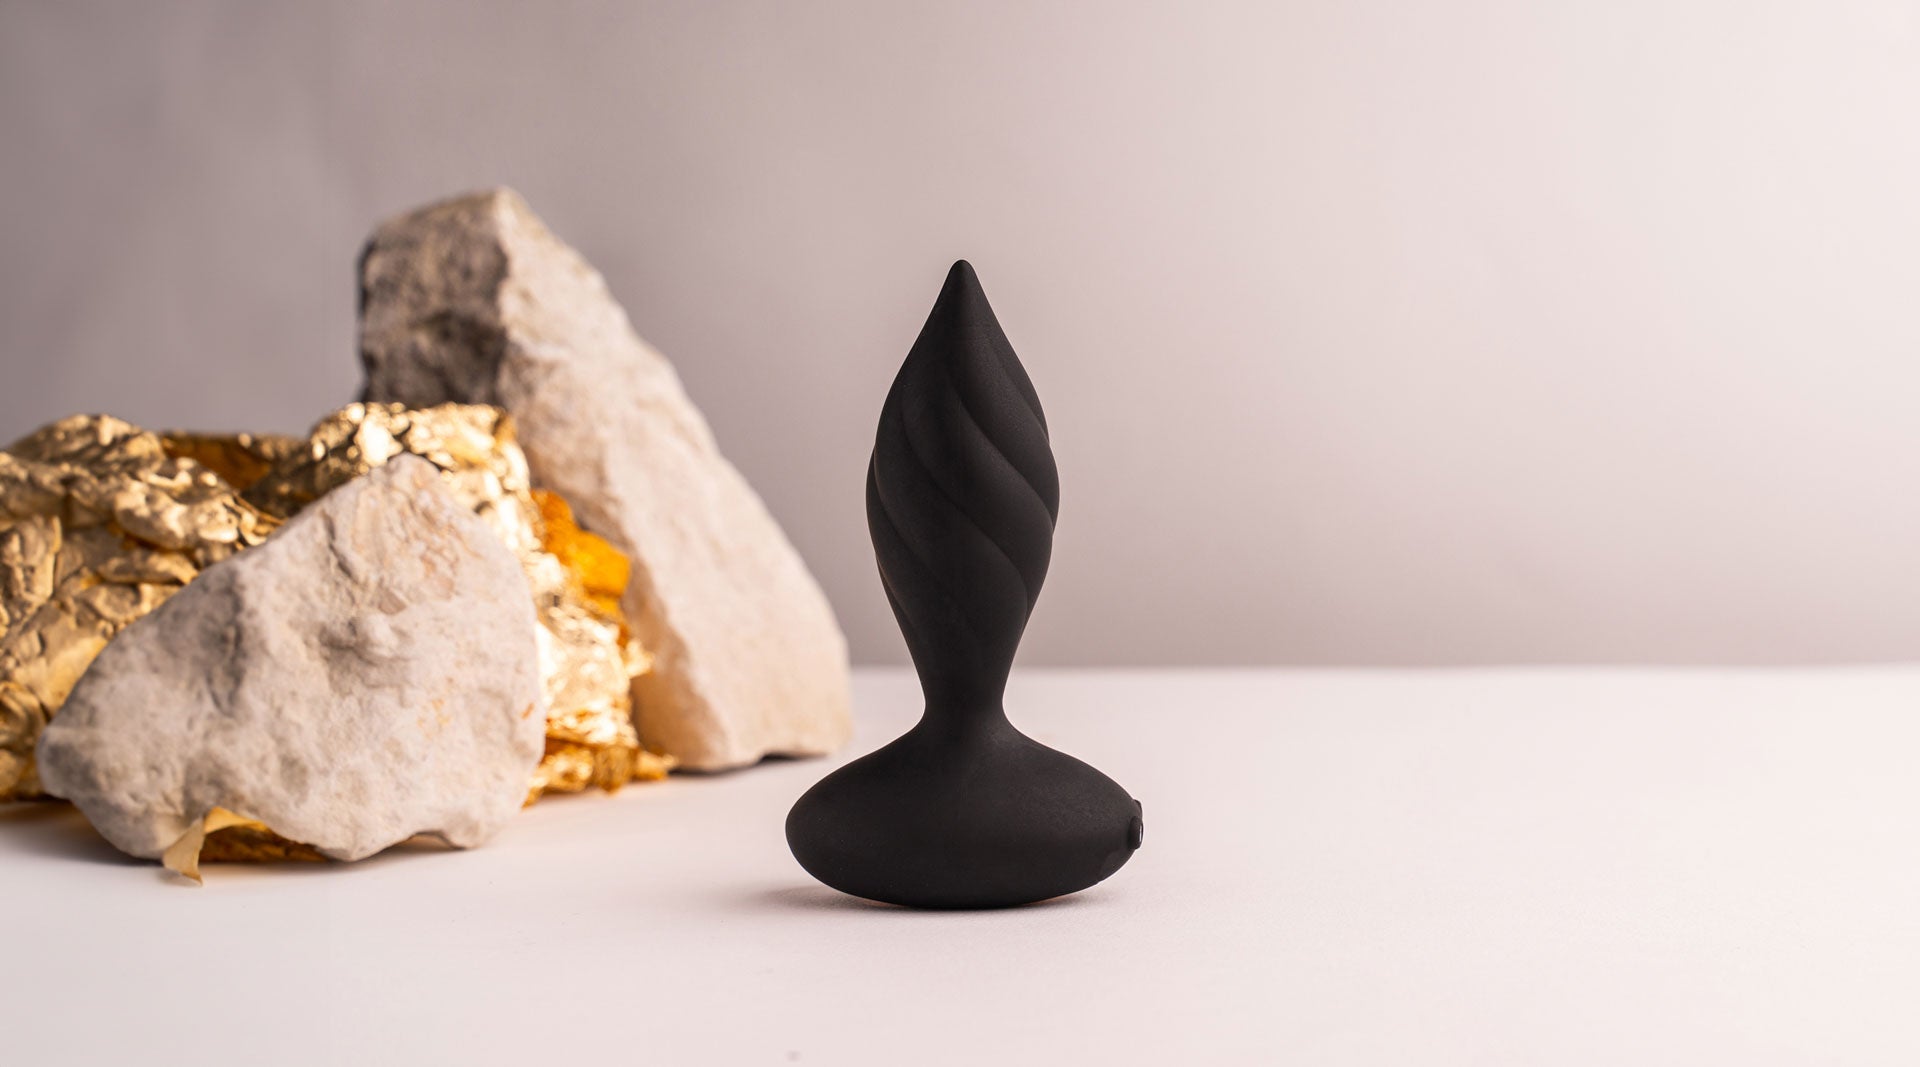 Black silicone butt plug with a tapered tip and twisted surface design.